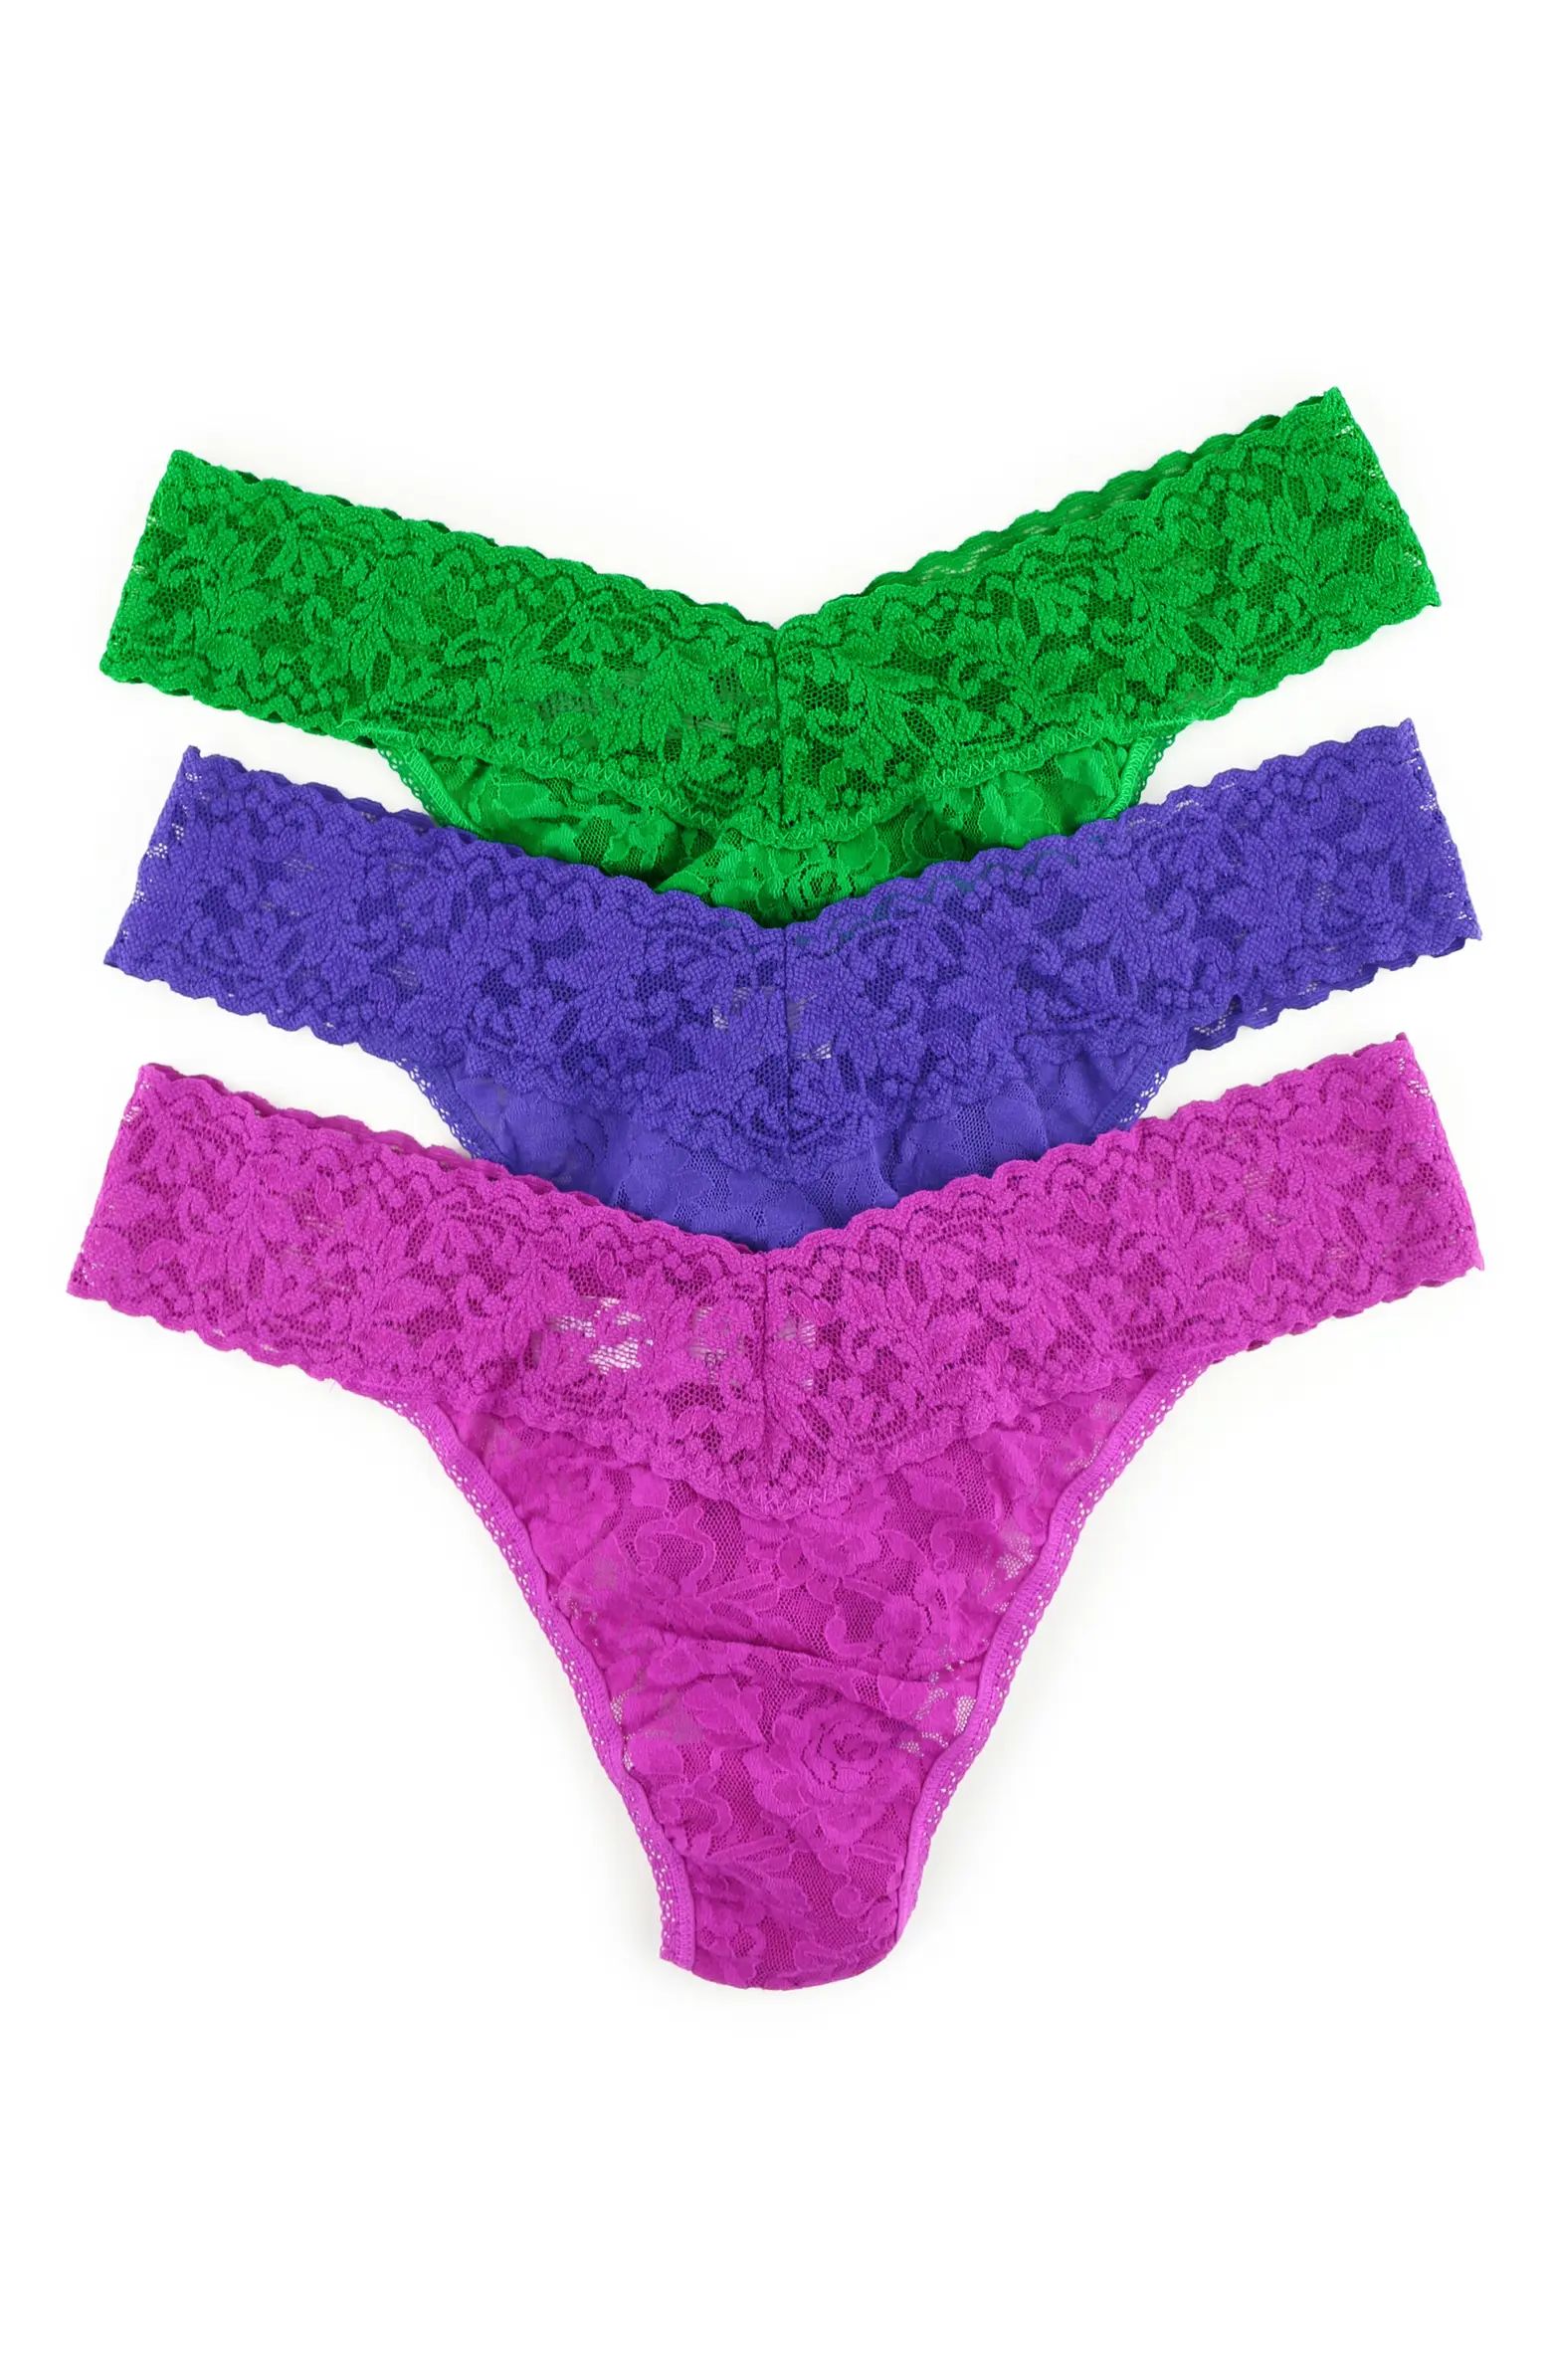 3-Pack Original Rise Lace Thongs | Nordstrom